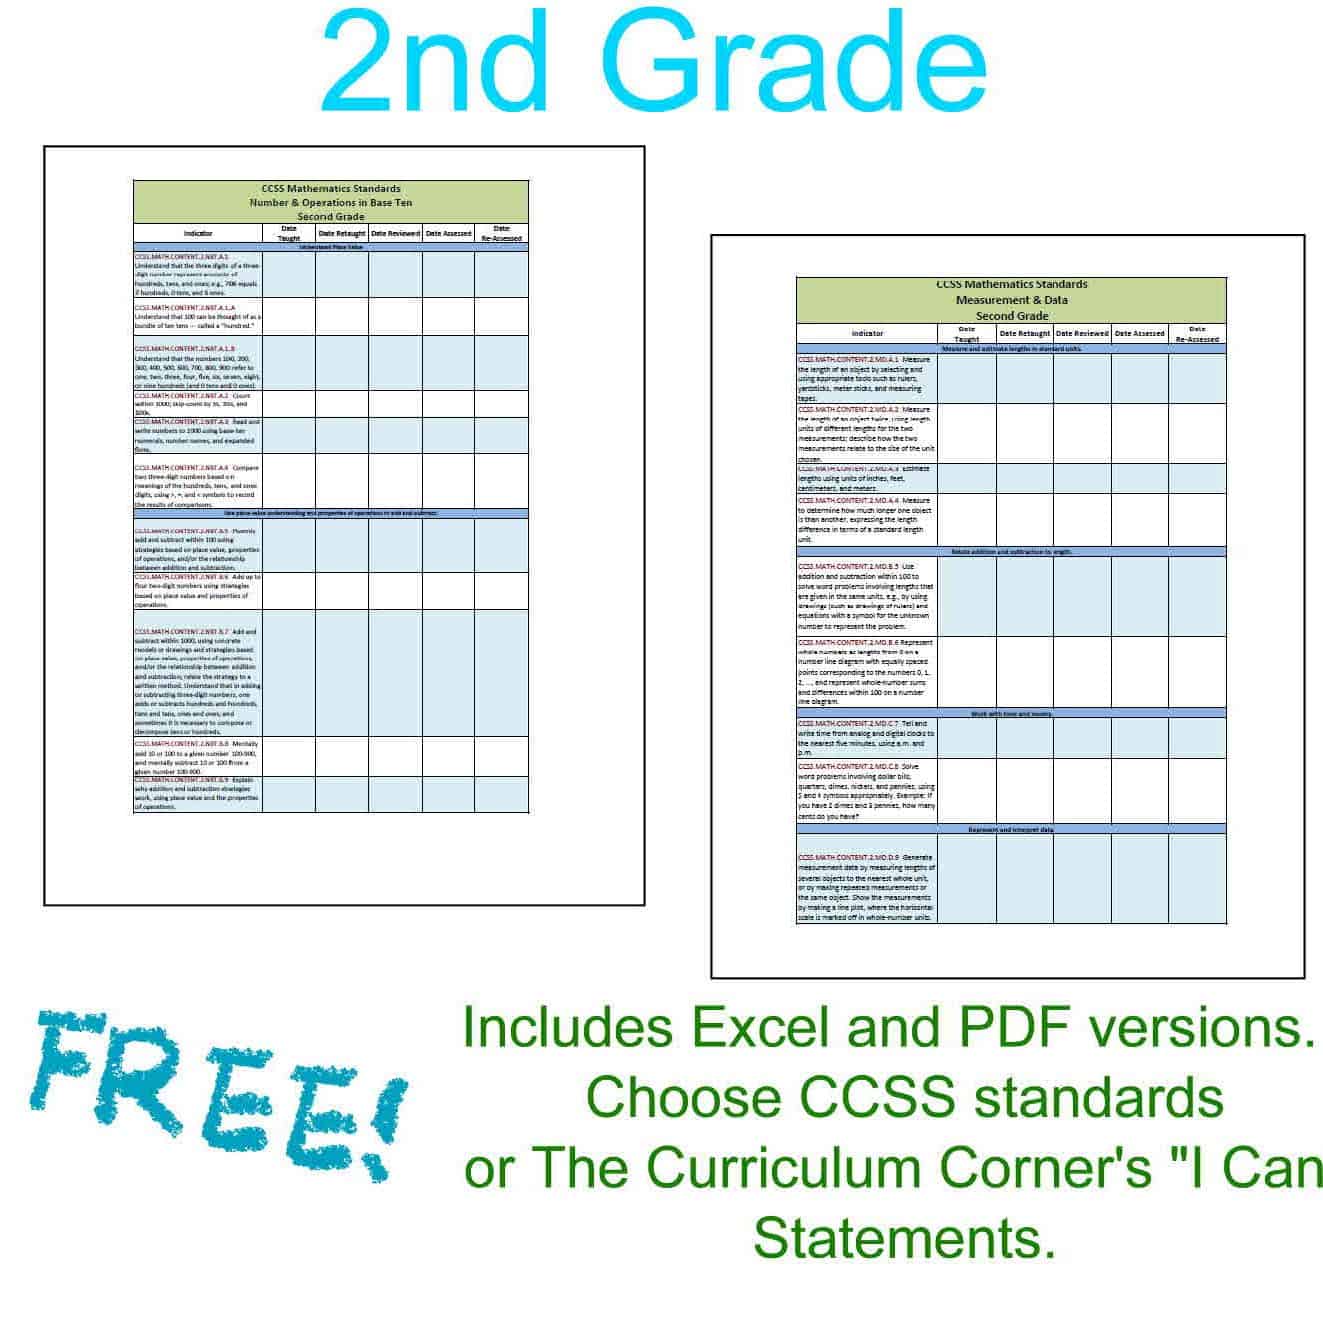 Updated 2nd Grade CCSS "I Can" Checklists - The Curriculum Corner 123